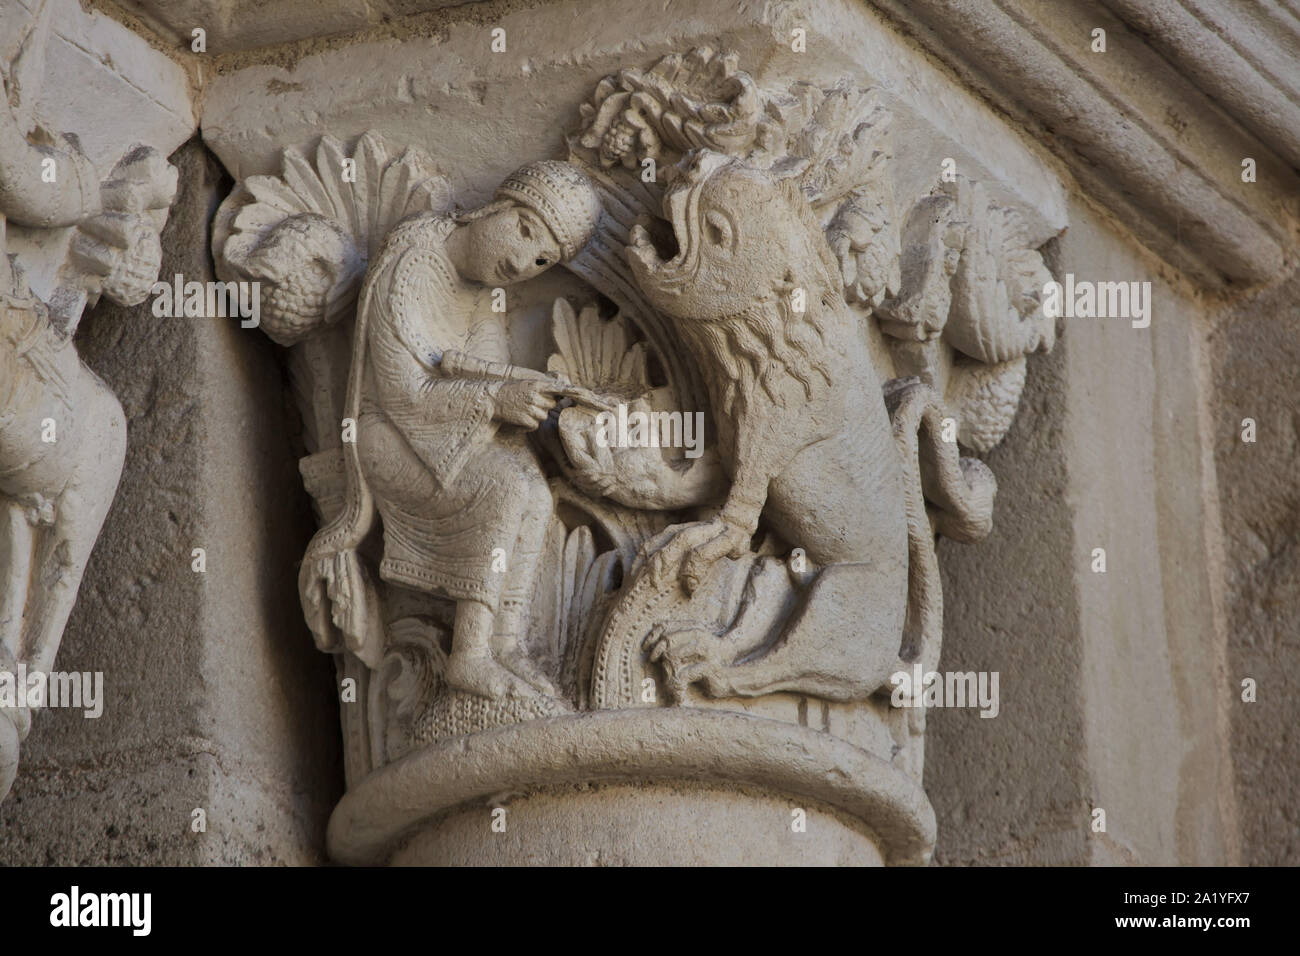 Saint Jerome and the Lion depicted in the Romanesque capital dated from the 12th century on the west portal of the Autun Cathedral (Cathédrale Saint-Lazare d'Autun) in Autun, Burgundy, France. The capital was probably carved by French Romanesque sculptor Gislebertus. Stock Photo